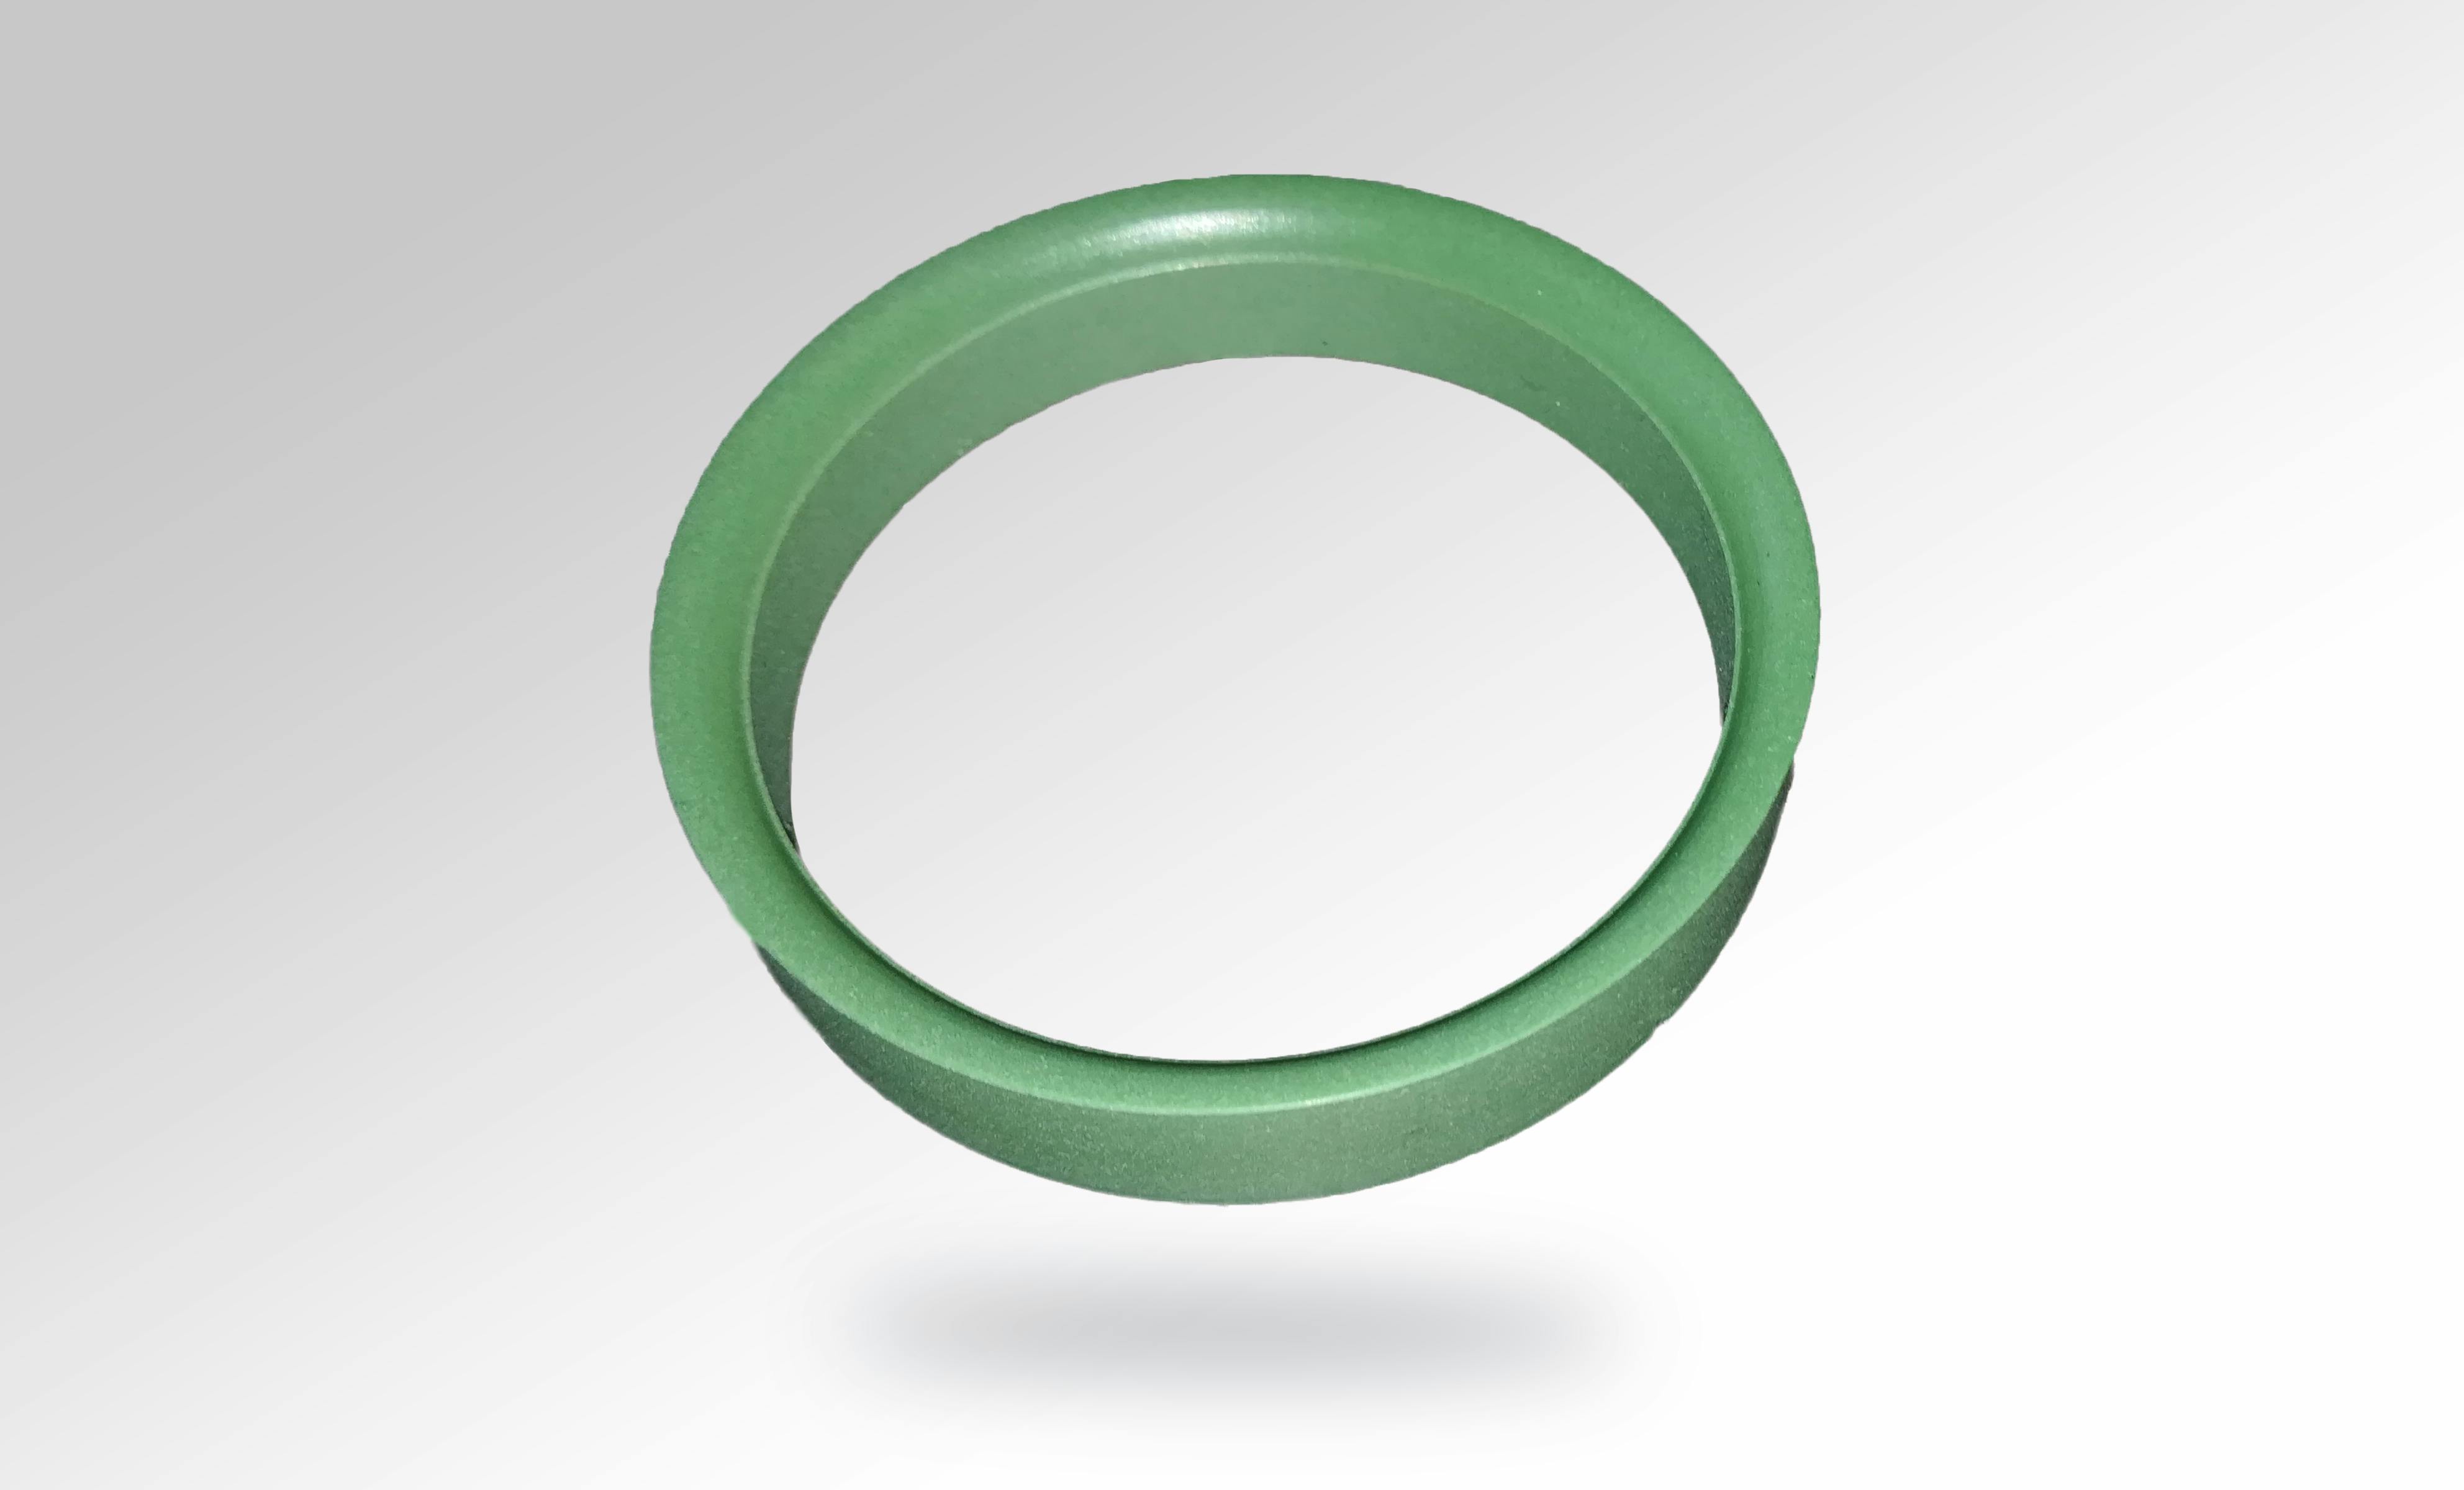 Valve seat insert made from VICTREX CT™ 200  © Victrex